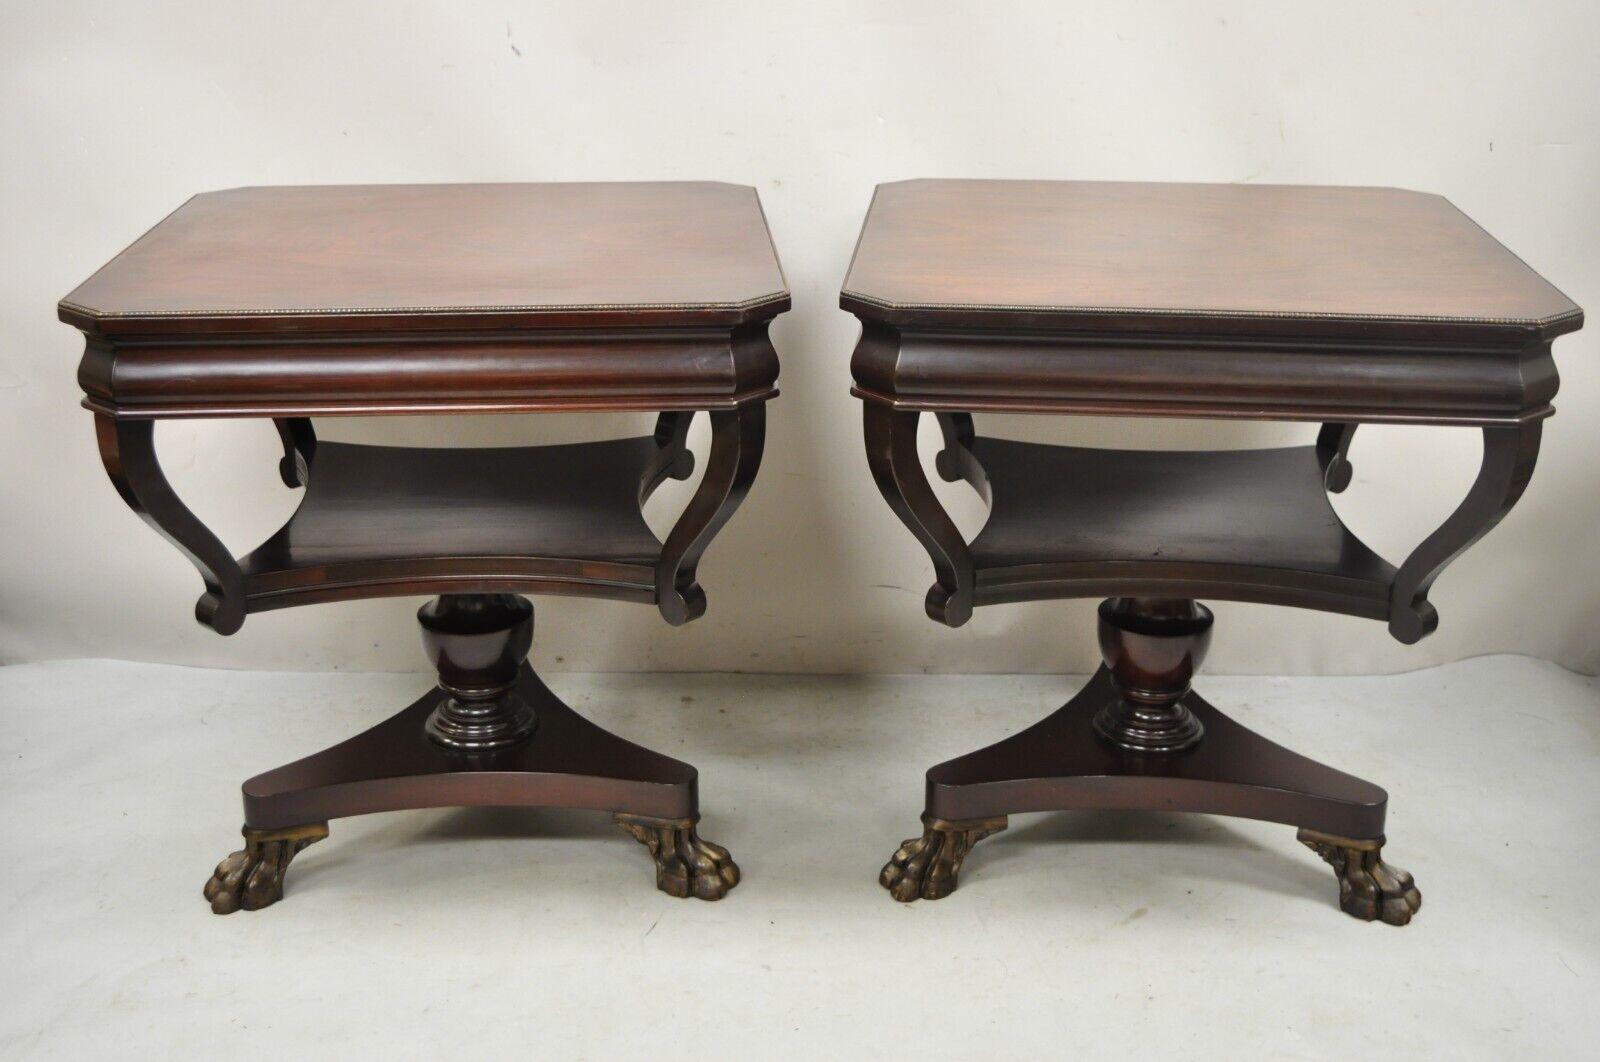 Vintage French Empire Style Mahogany Paw Feet Side Tables - a Pair. Item features a claw foot tripod pedestal base, lower shelf, beautiful woodgrain, very nice vintage pair, quality American craftsmanship. Circa Early to Mid 20th Century.